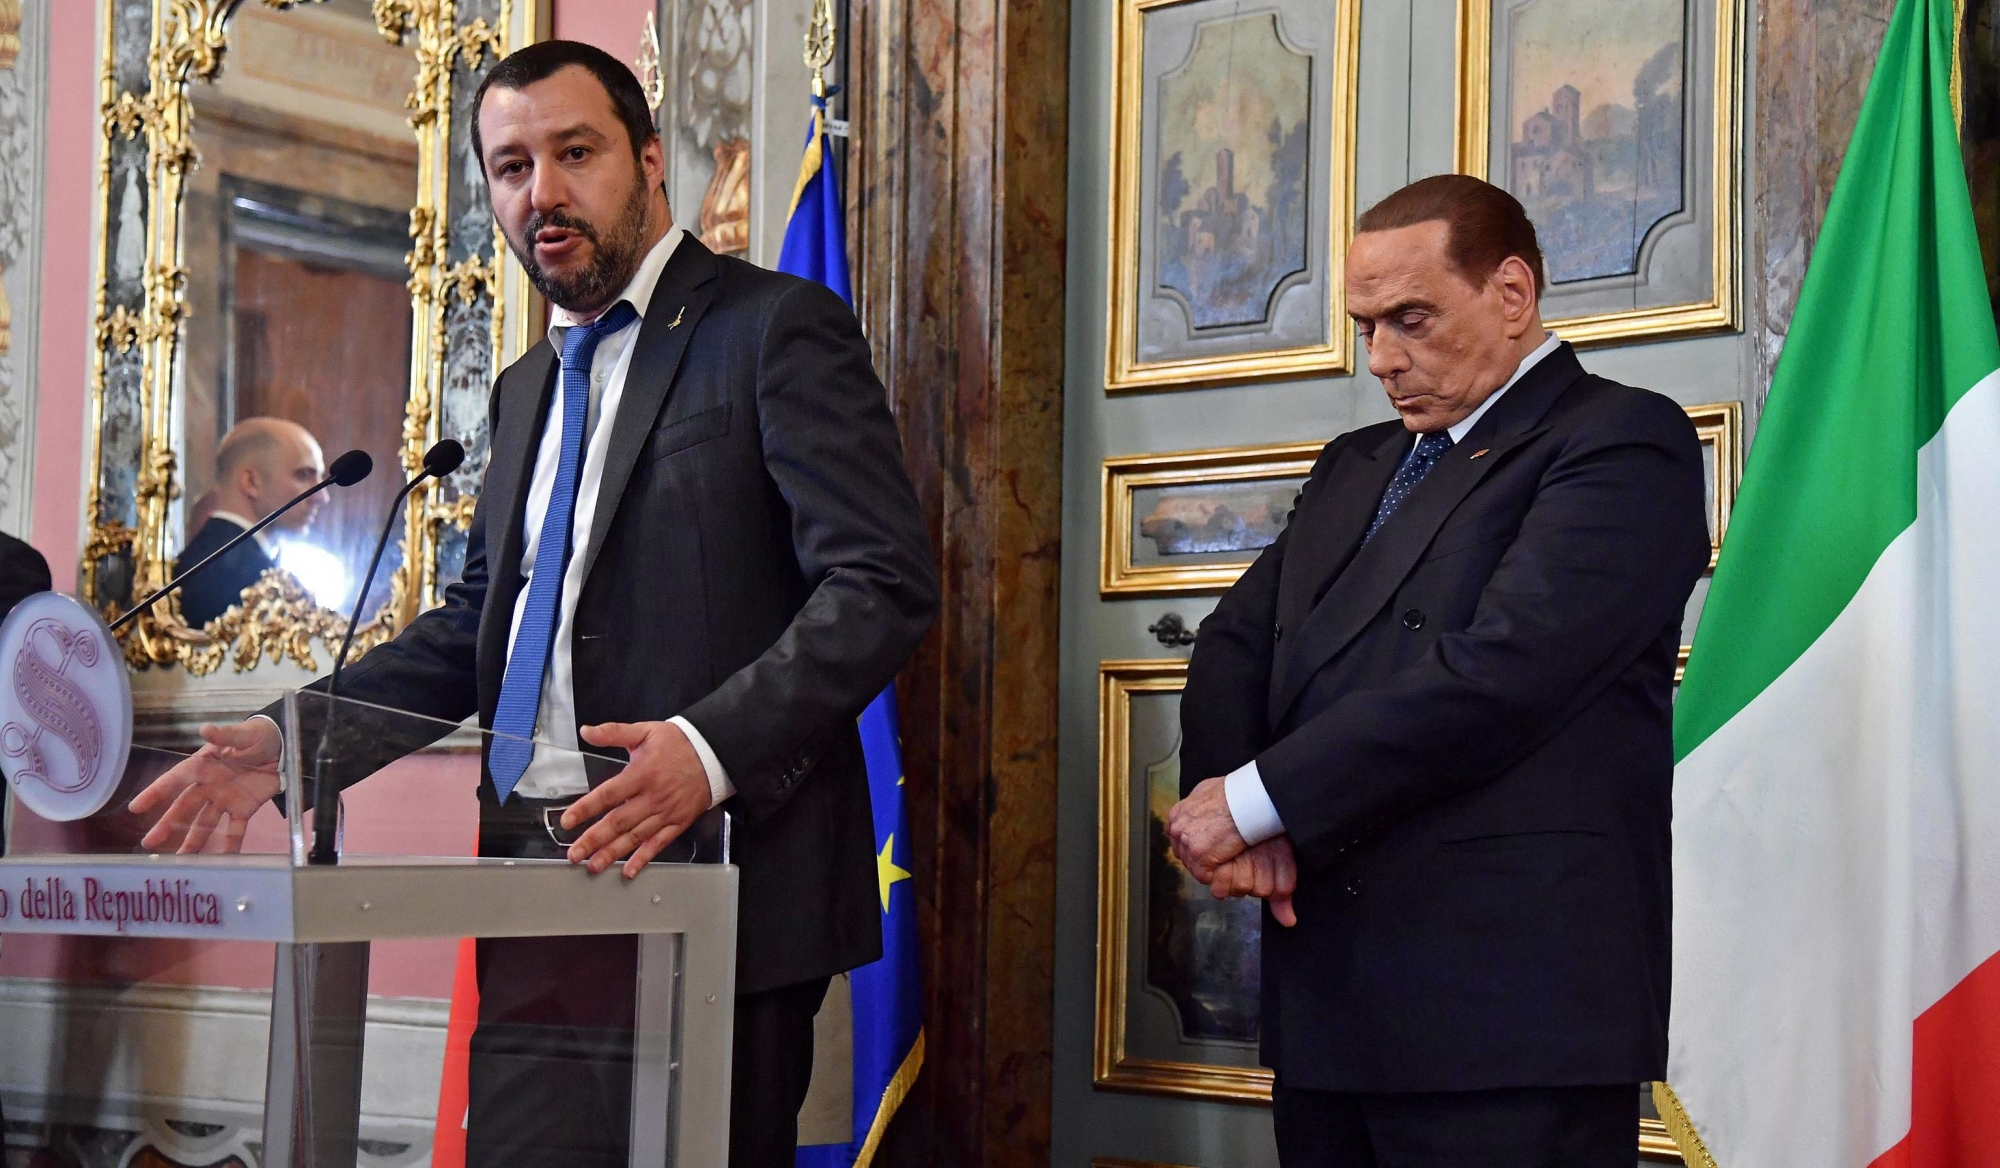 epa06679589 Leader of Lega party Matteo Salvini (L) and leader of Forza Italia party Silvio Berlusconi (R) address the media after a meeting with Senate Speaker Casellati for a round of consultations in Rome, Italy, 19 April 2018. President Mattarella has given Senate Speaker Casellati the task of verifying coalition possibilities following the 04 March general election in order to make a decision on to whom to give a mandate to form a new government.  EPA/ETTORE FERRARI ITALY PARTIES ELECTIONS AFTERMATH